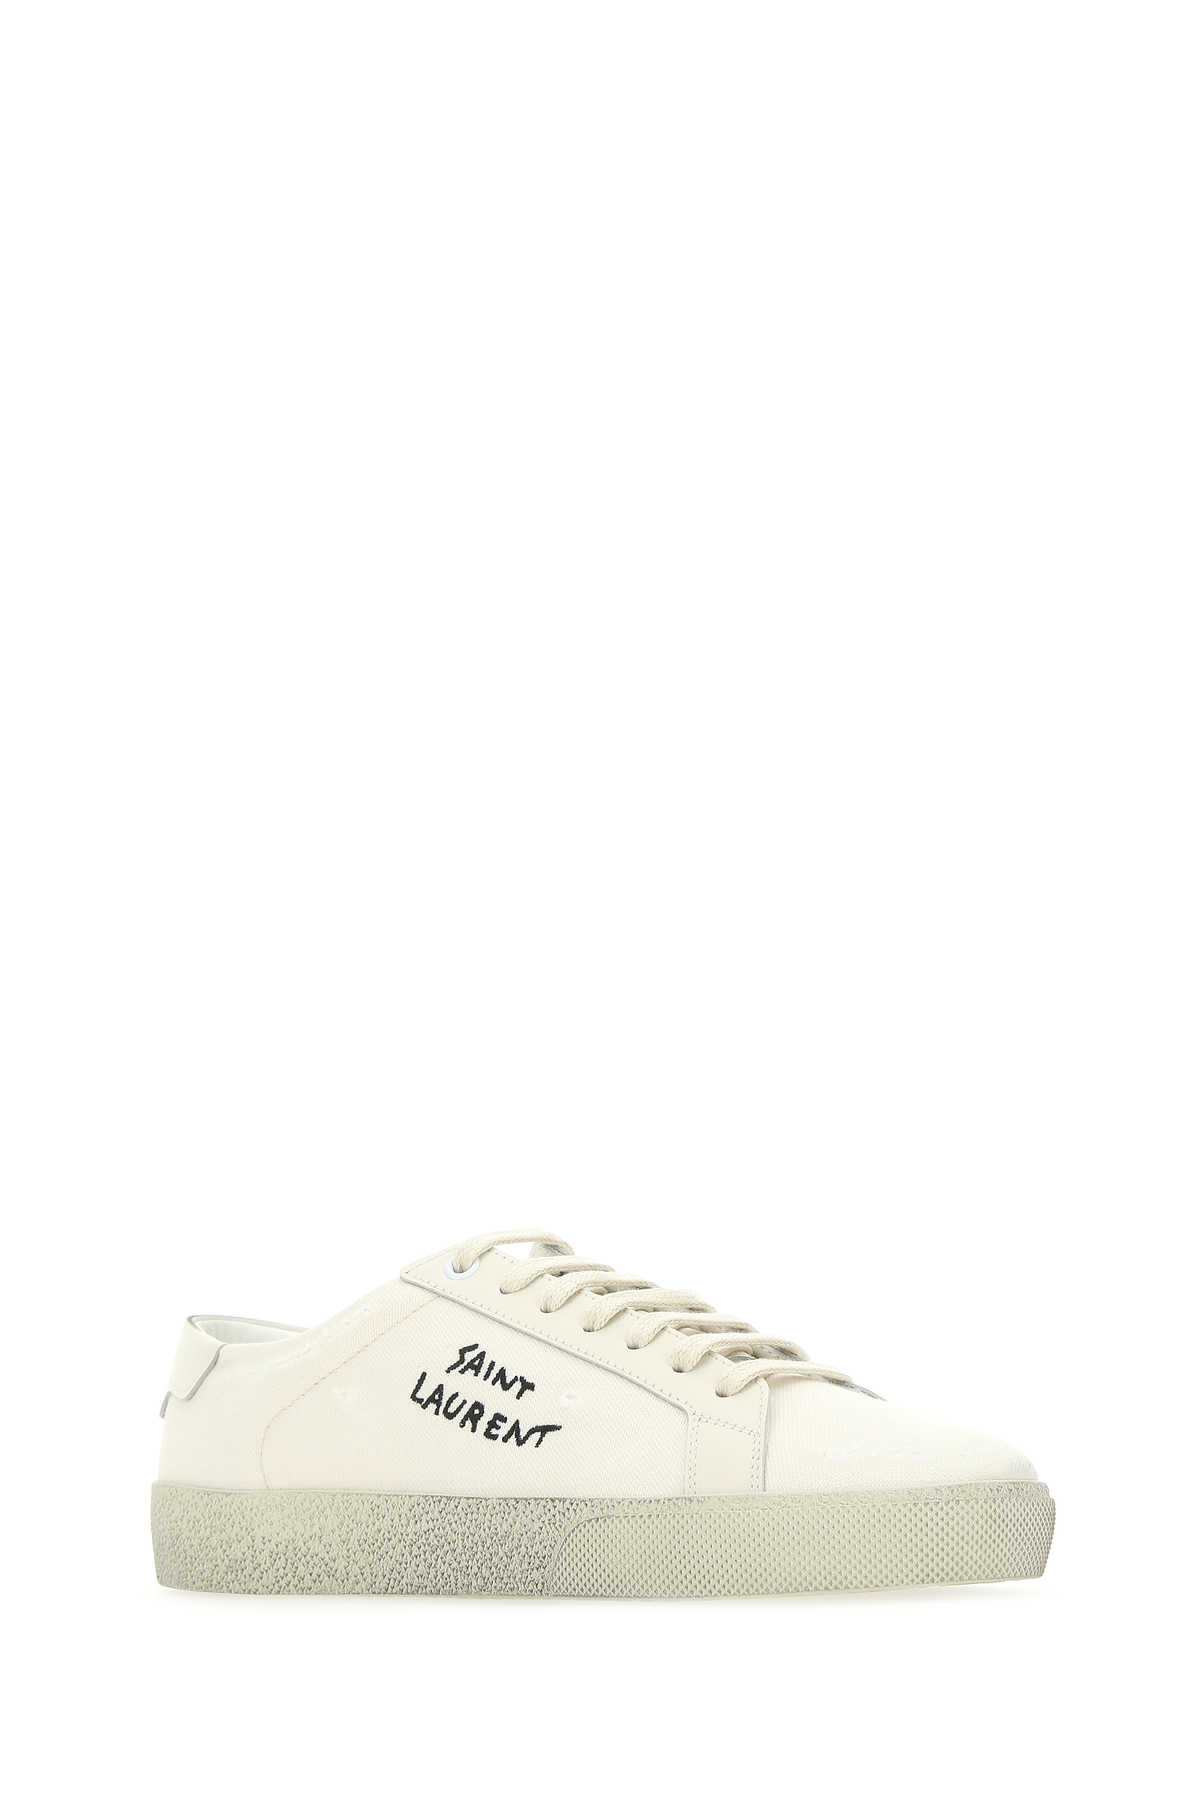 Saint Laurent Ivory Canvas Sl/06 Sneakers In White